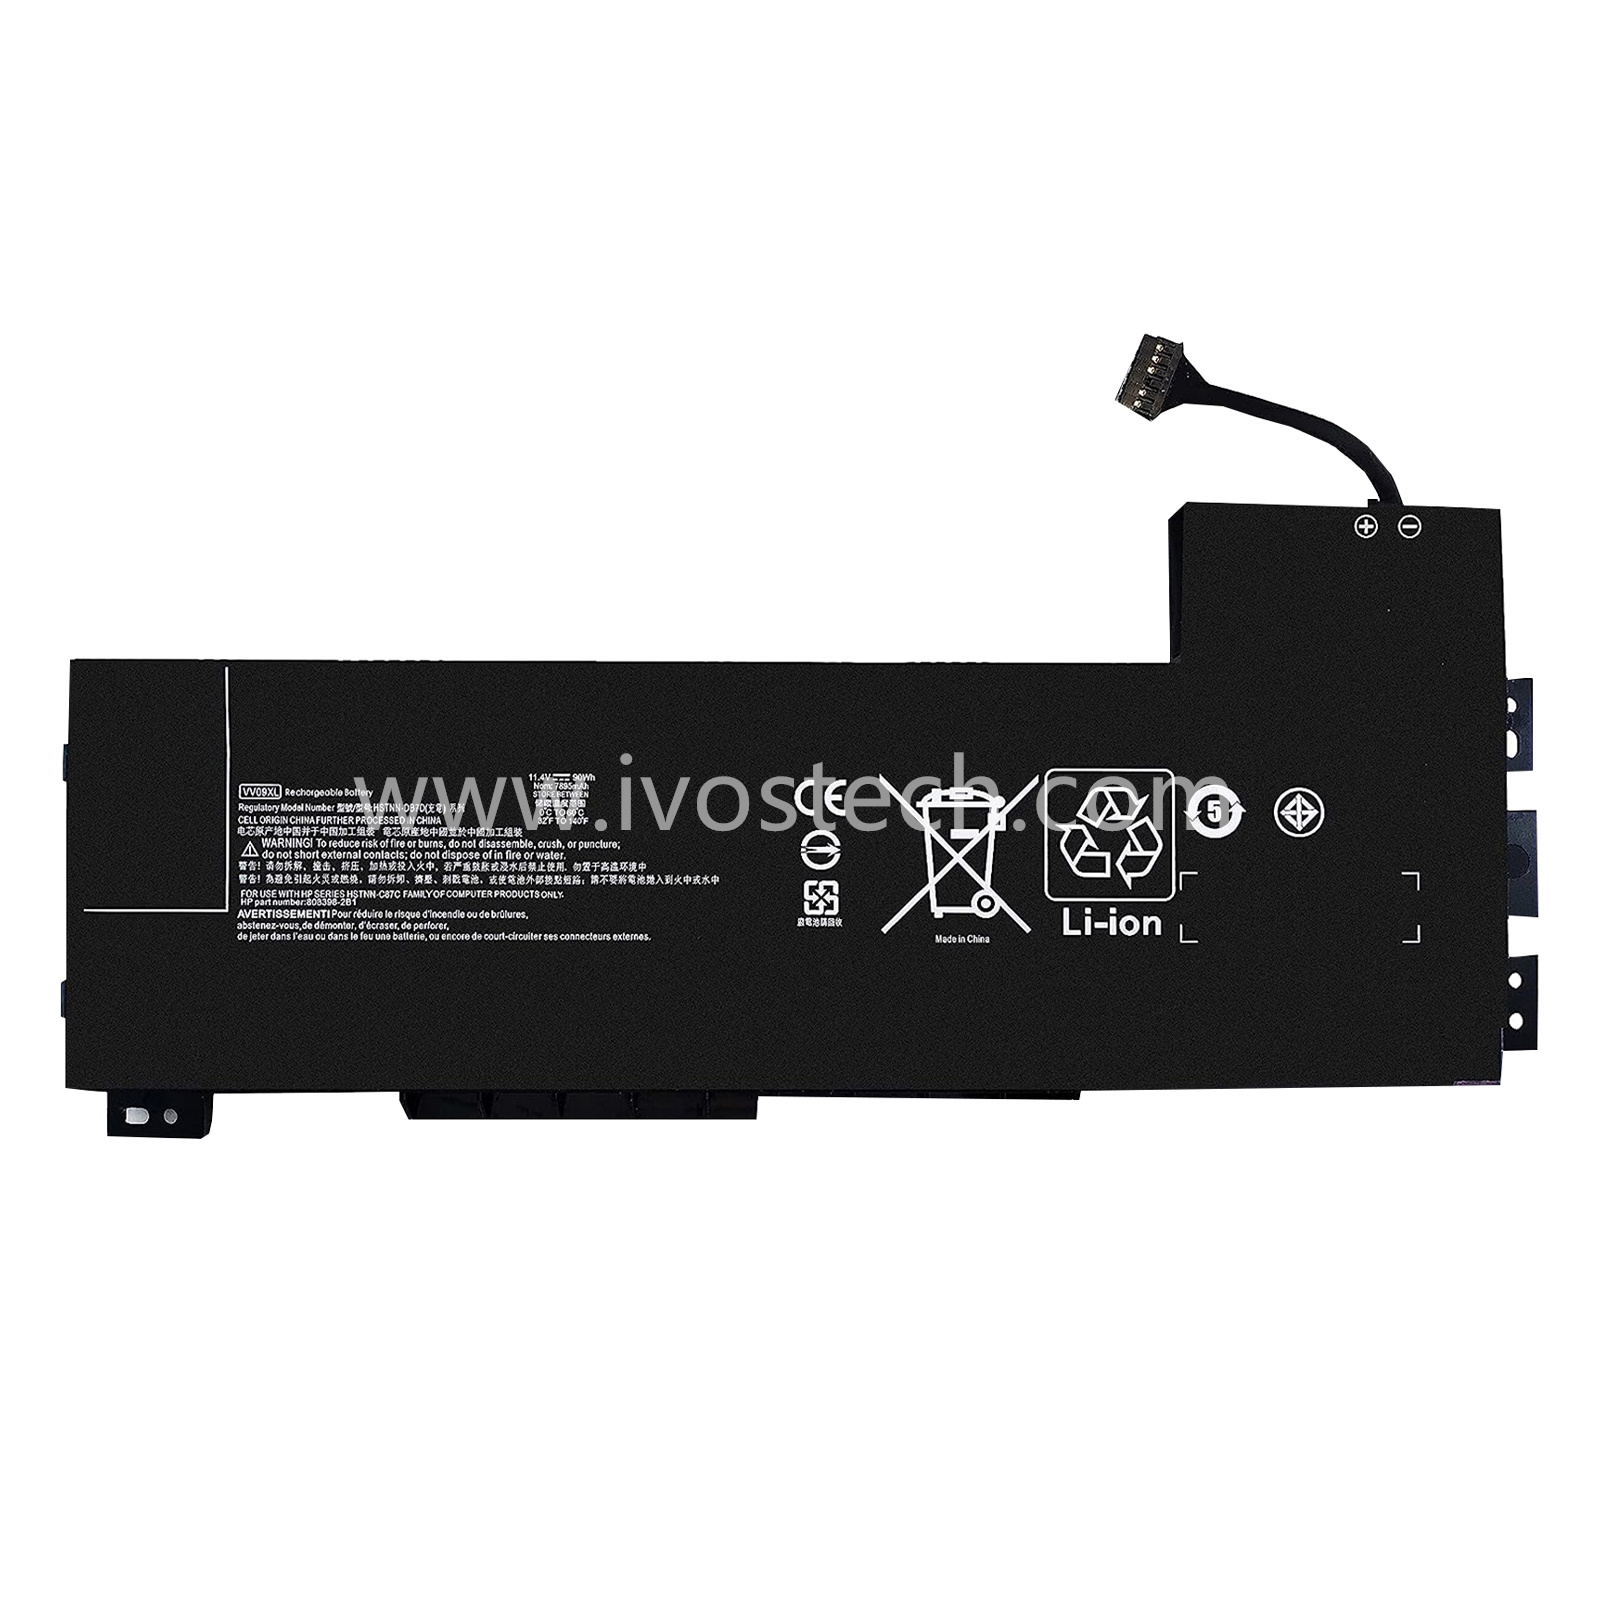 VV09XL 90Wh 11.4V Replacement Laptop Battery for HP ZBook 15 G3 G4 ZBook 17 G3 Mobile Workstation Series